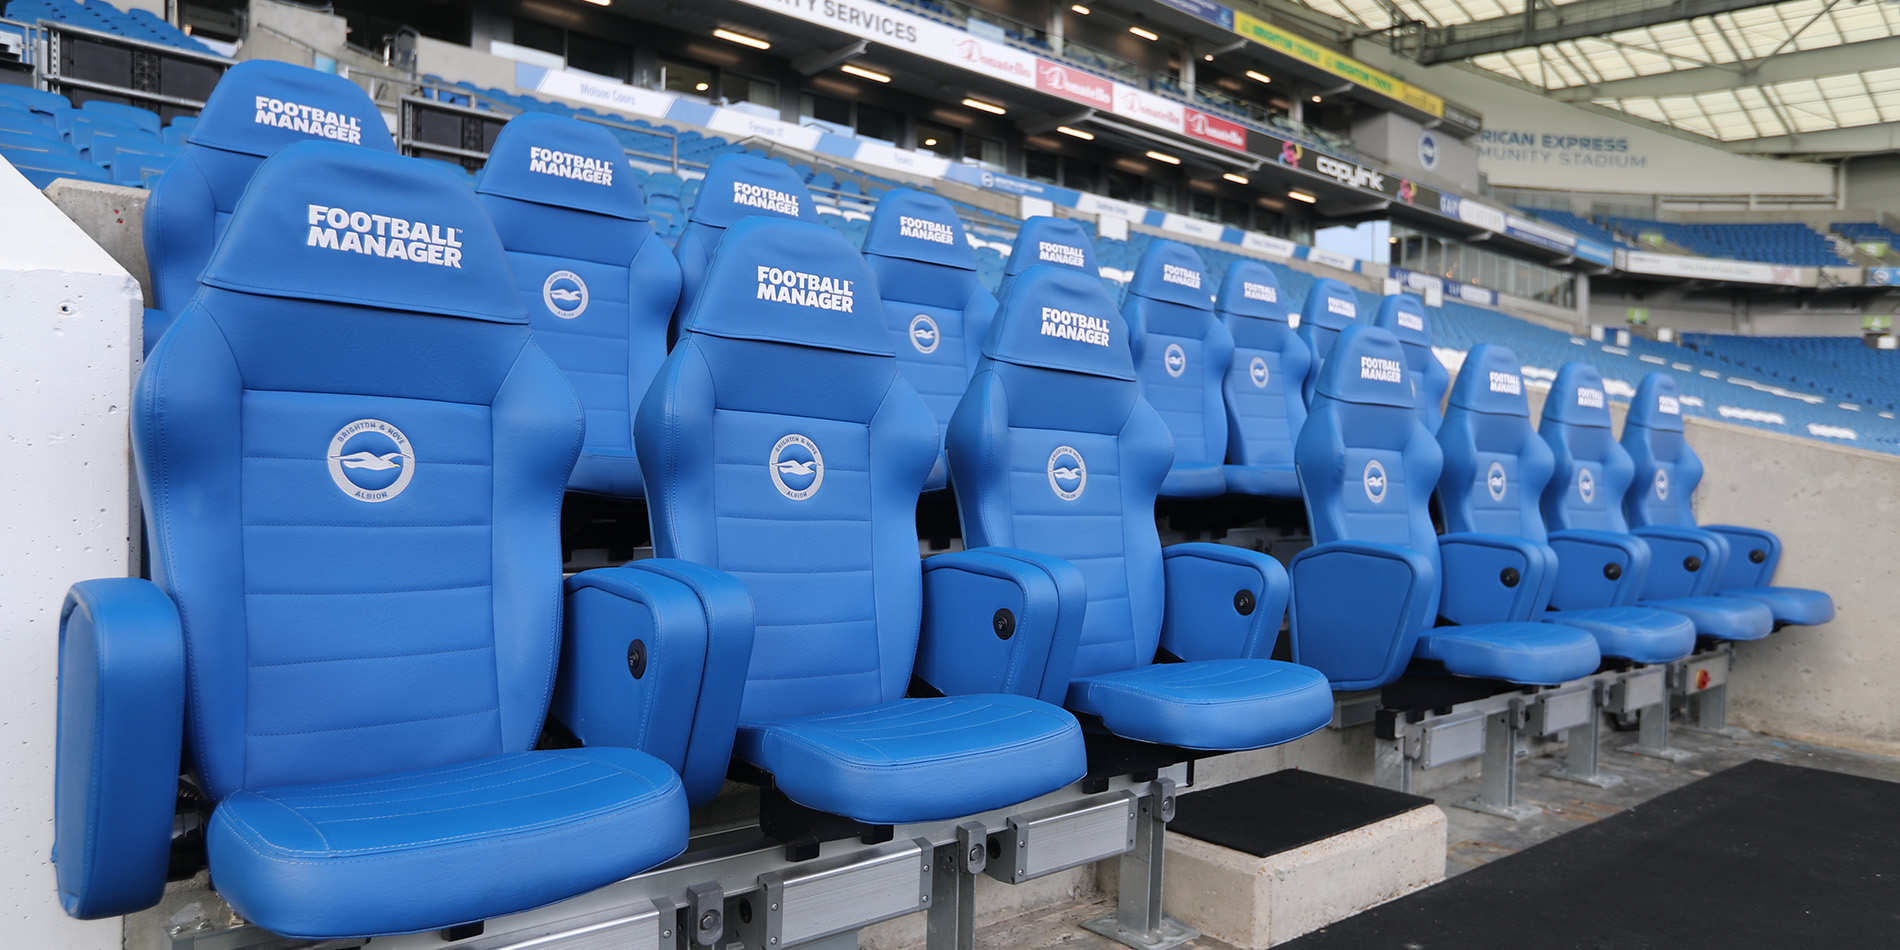 Brighton & Hove Albion continue as Football Manager Official Partner